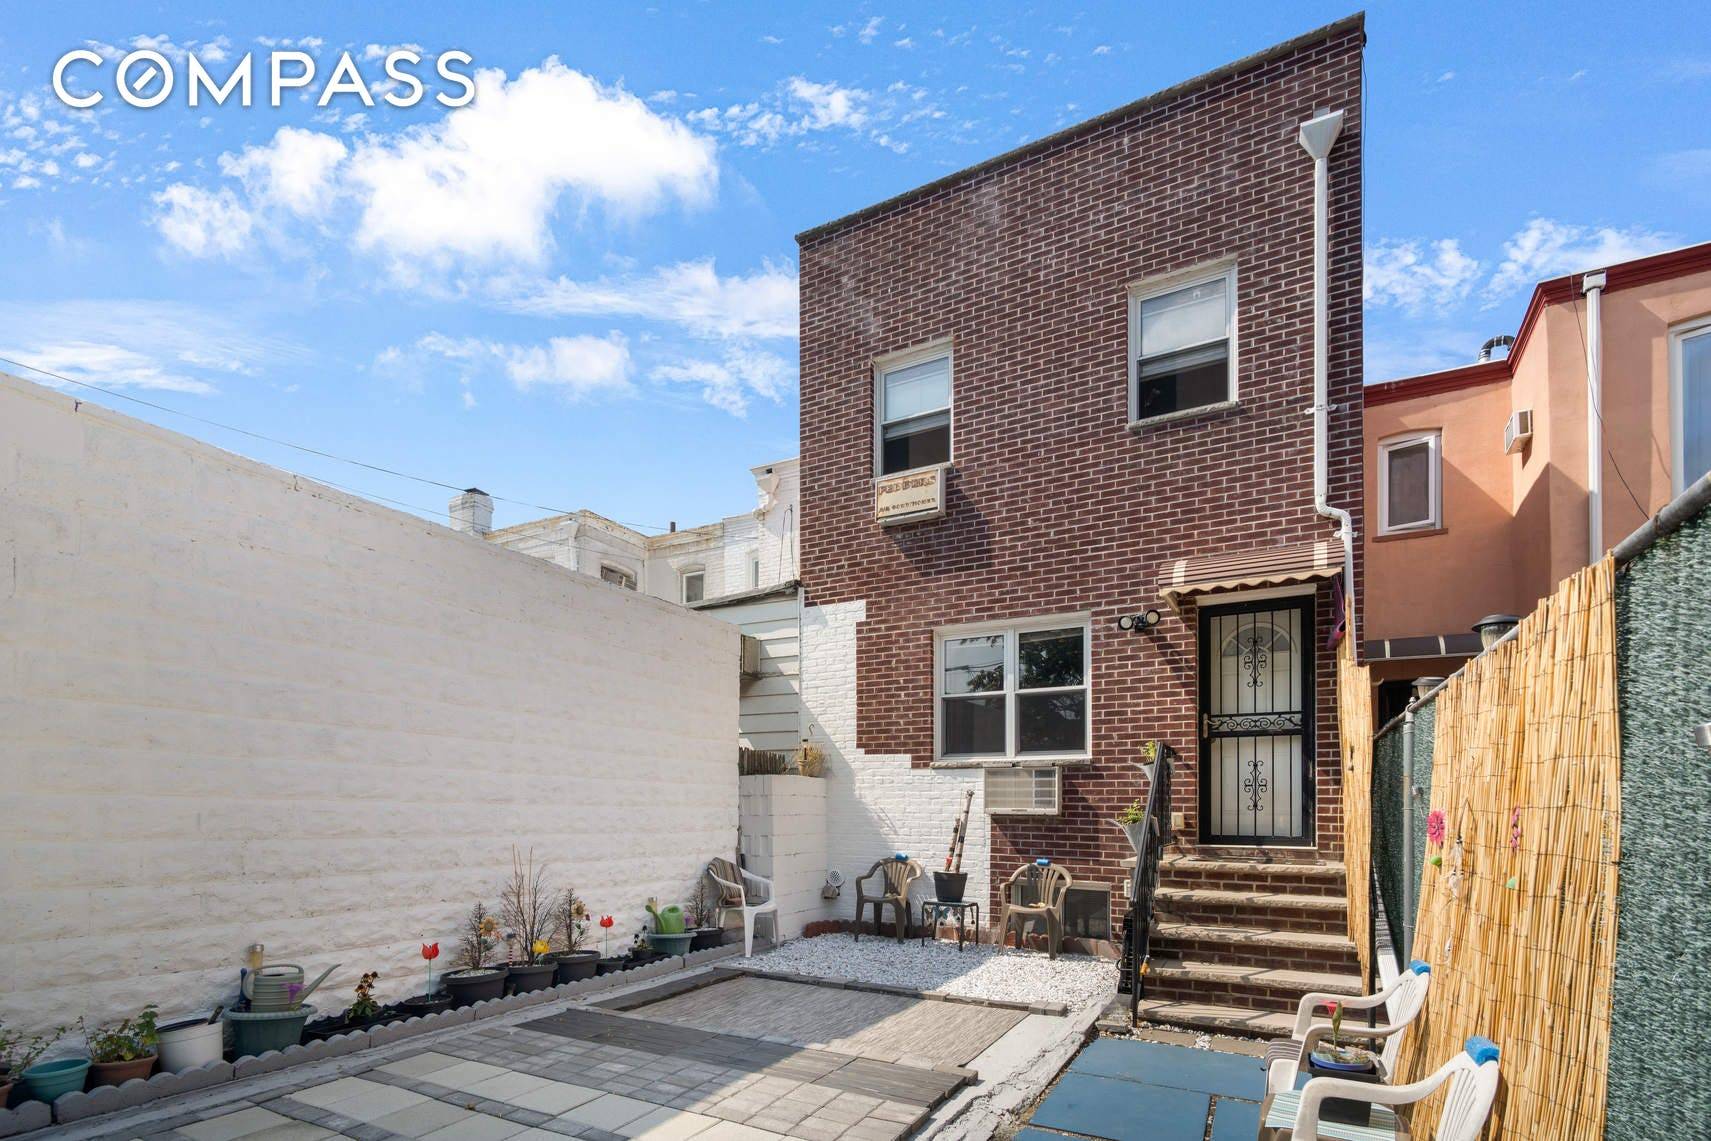 Meticulously maintained legal two family brick house in the coveted 30th Ave section of Astoria.